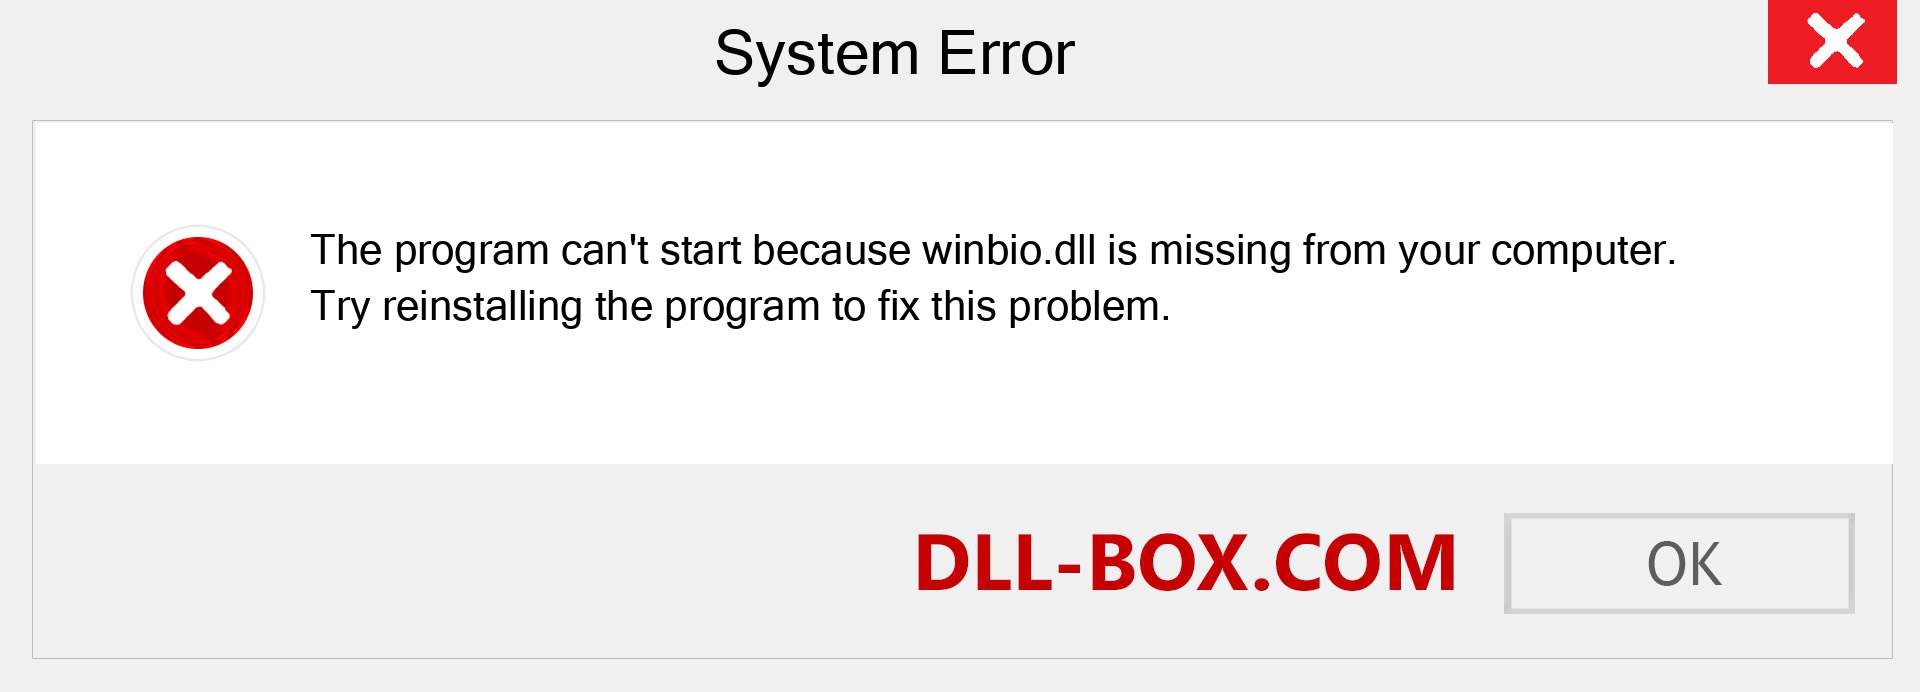  winbio.dll file is missing?. Download for Windows 7, 8, 10 - Fix  winbio dll Missing Error on Windows, photos, images